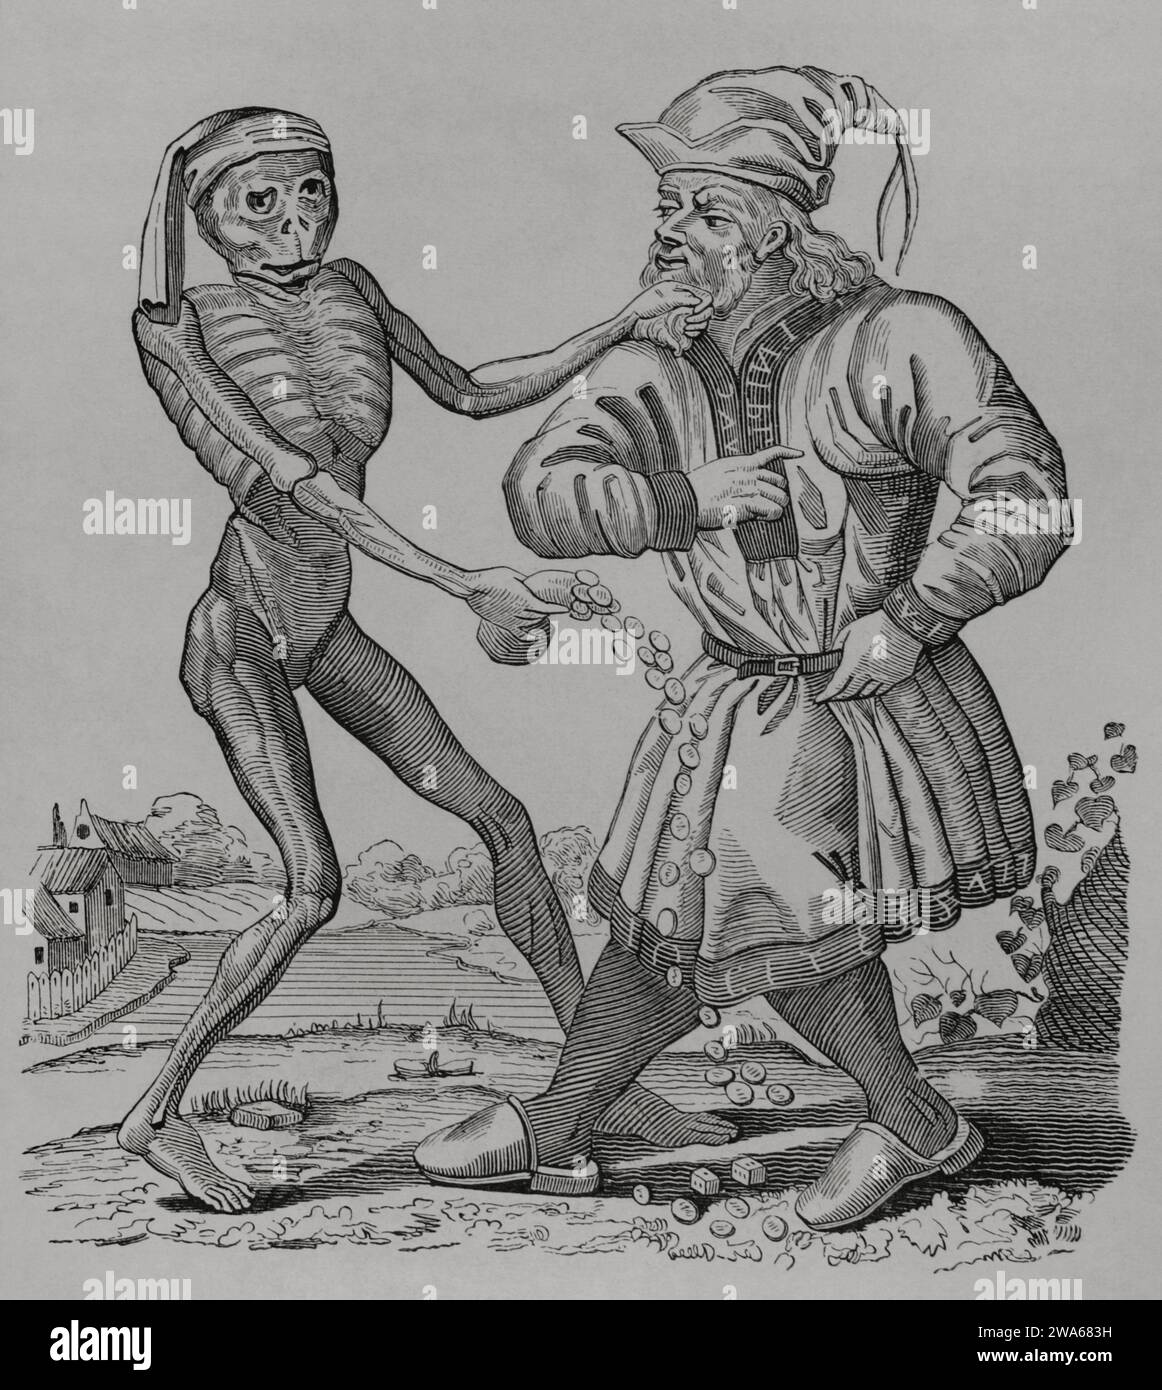 The Jew and Death. Episode from the Dance of Death, painted in 1441 in the Dominican cemetery in Basel. Engraving from an original by Matthaus Merian in 1641. 'Les Arts au Moyen Age et a l'Epoque de la Renaissance', by Paul Lacroix. Paris, 1877. Stock Photo